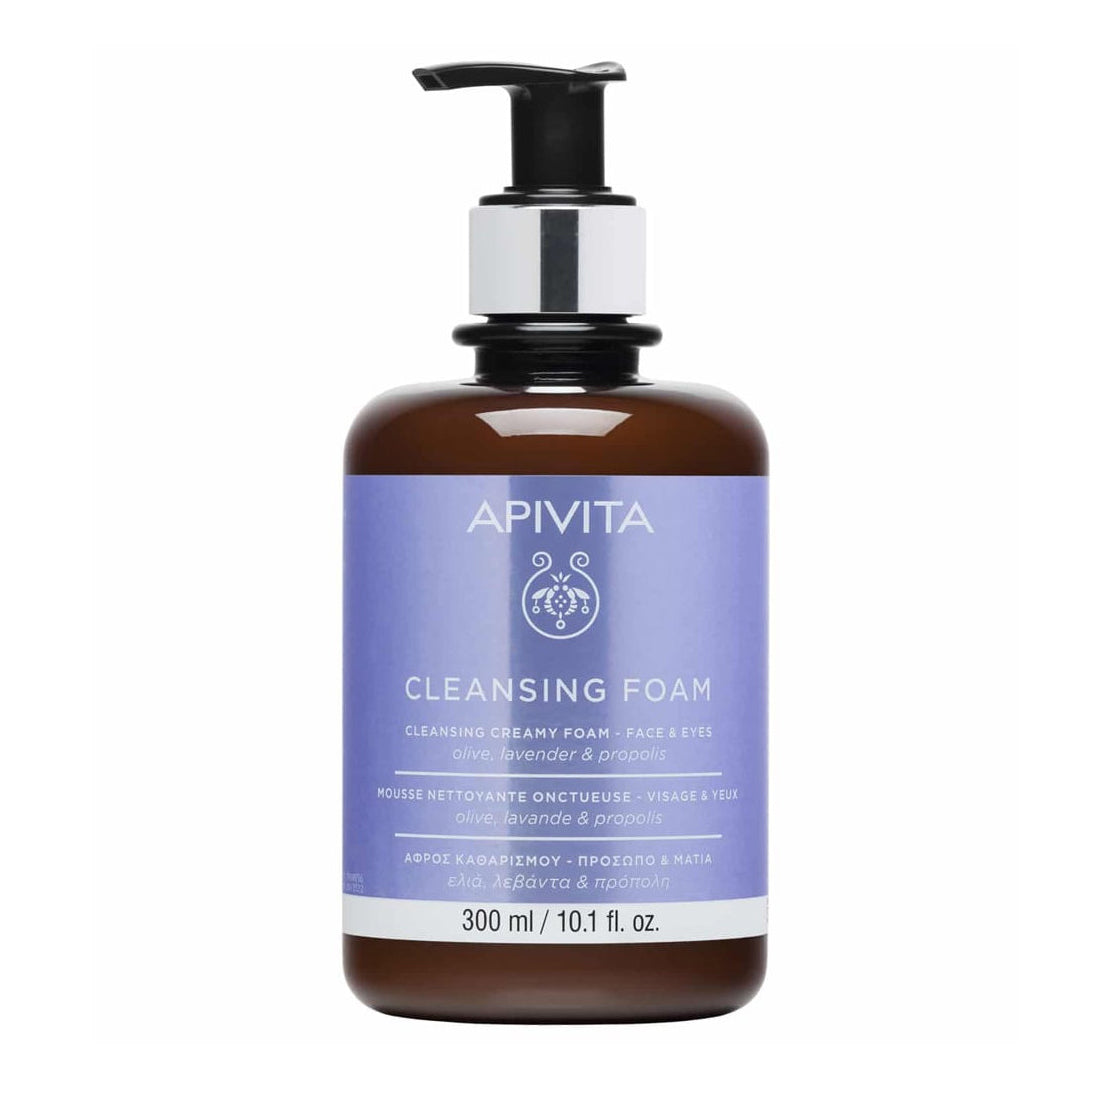 Apivita Cleansing Creamy Foam Face & Eye with Olive & Lavender & Propolis 300ml